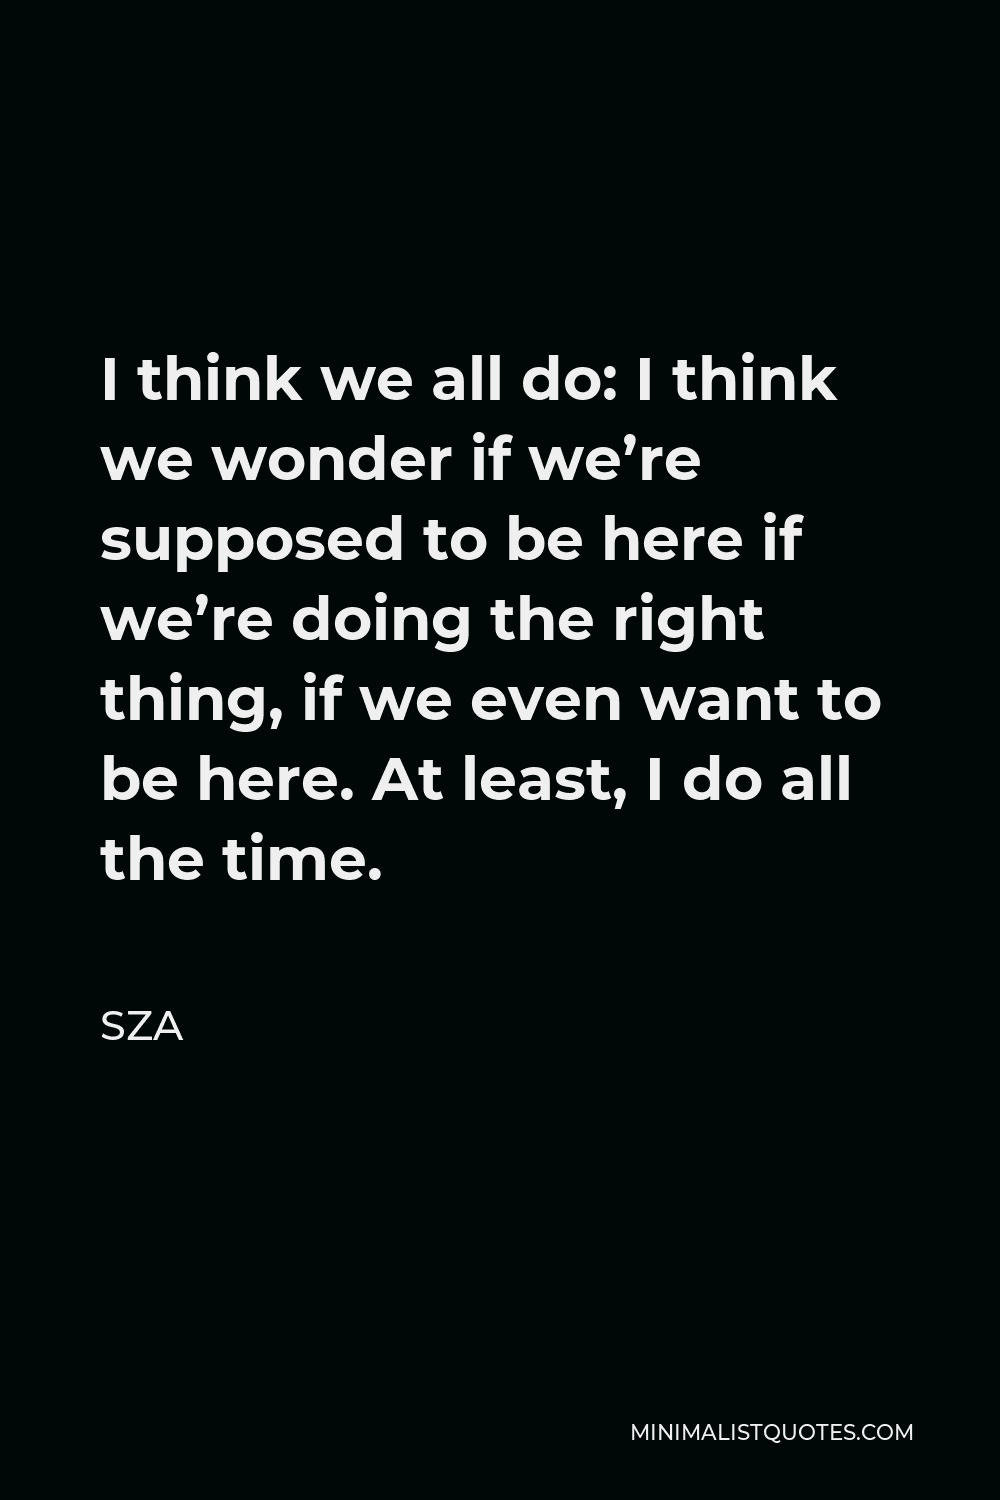 8 Sza Quotes About Life